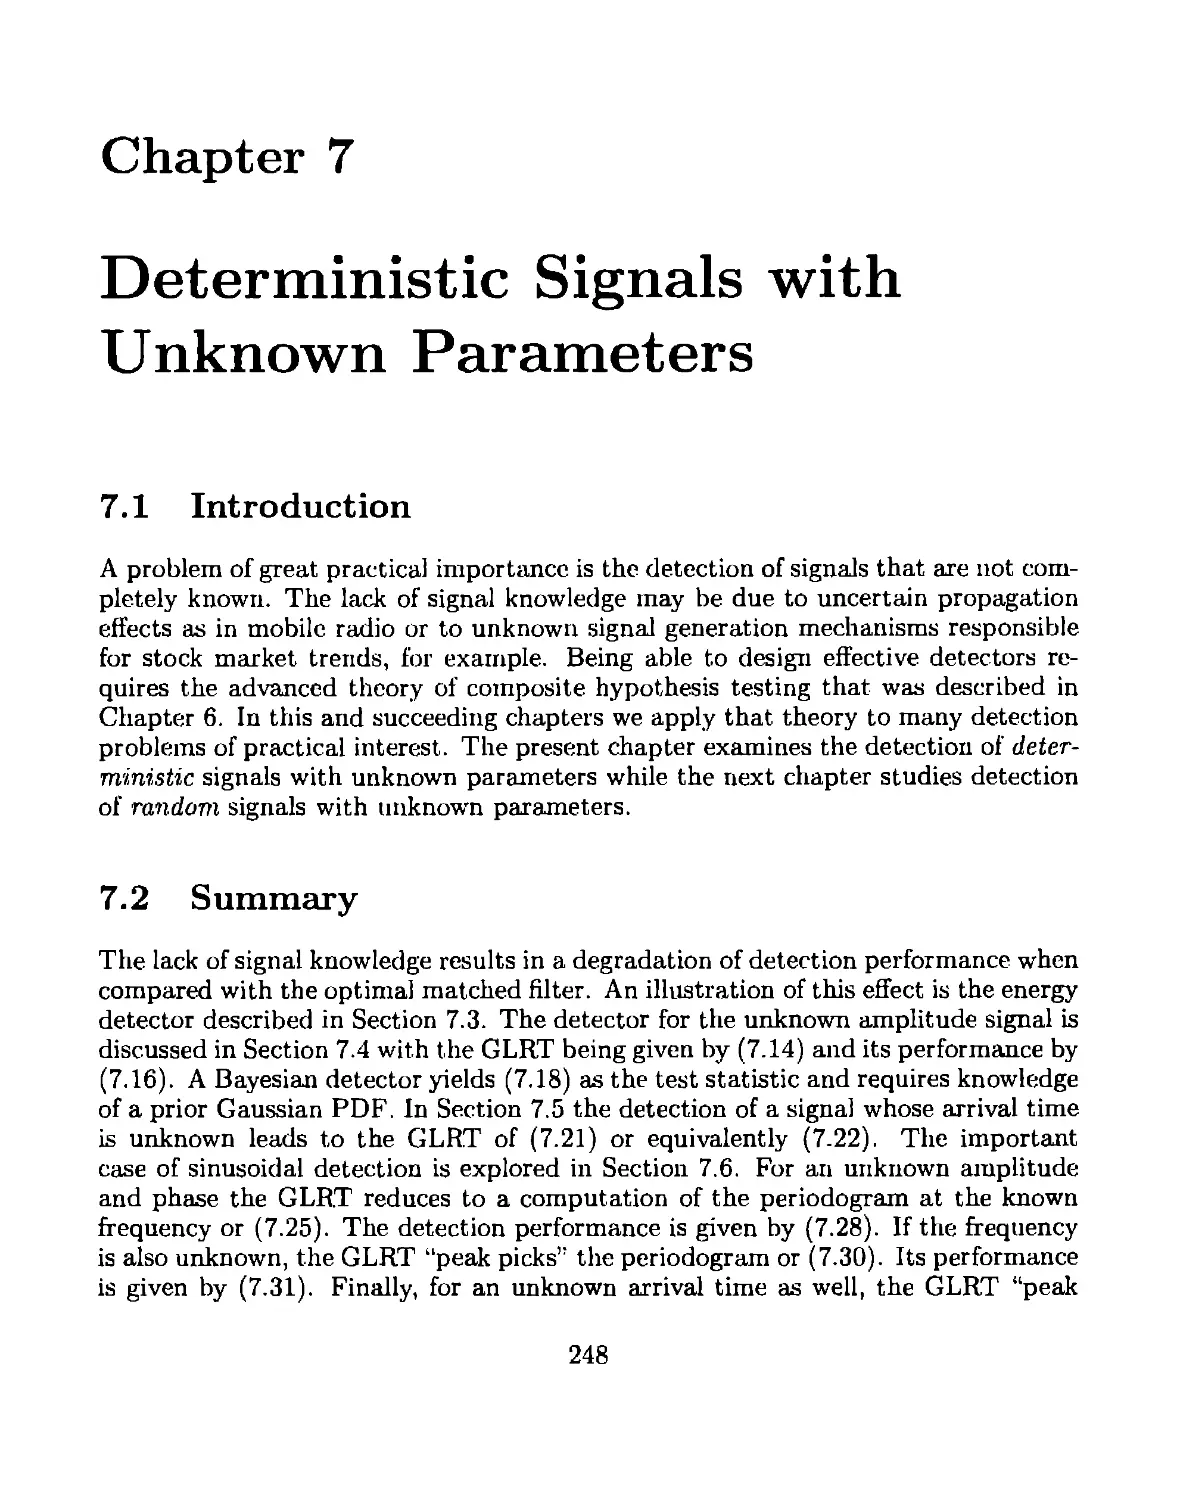 7 Deterministic Signals with Unknown Parameters
7.2 Summary